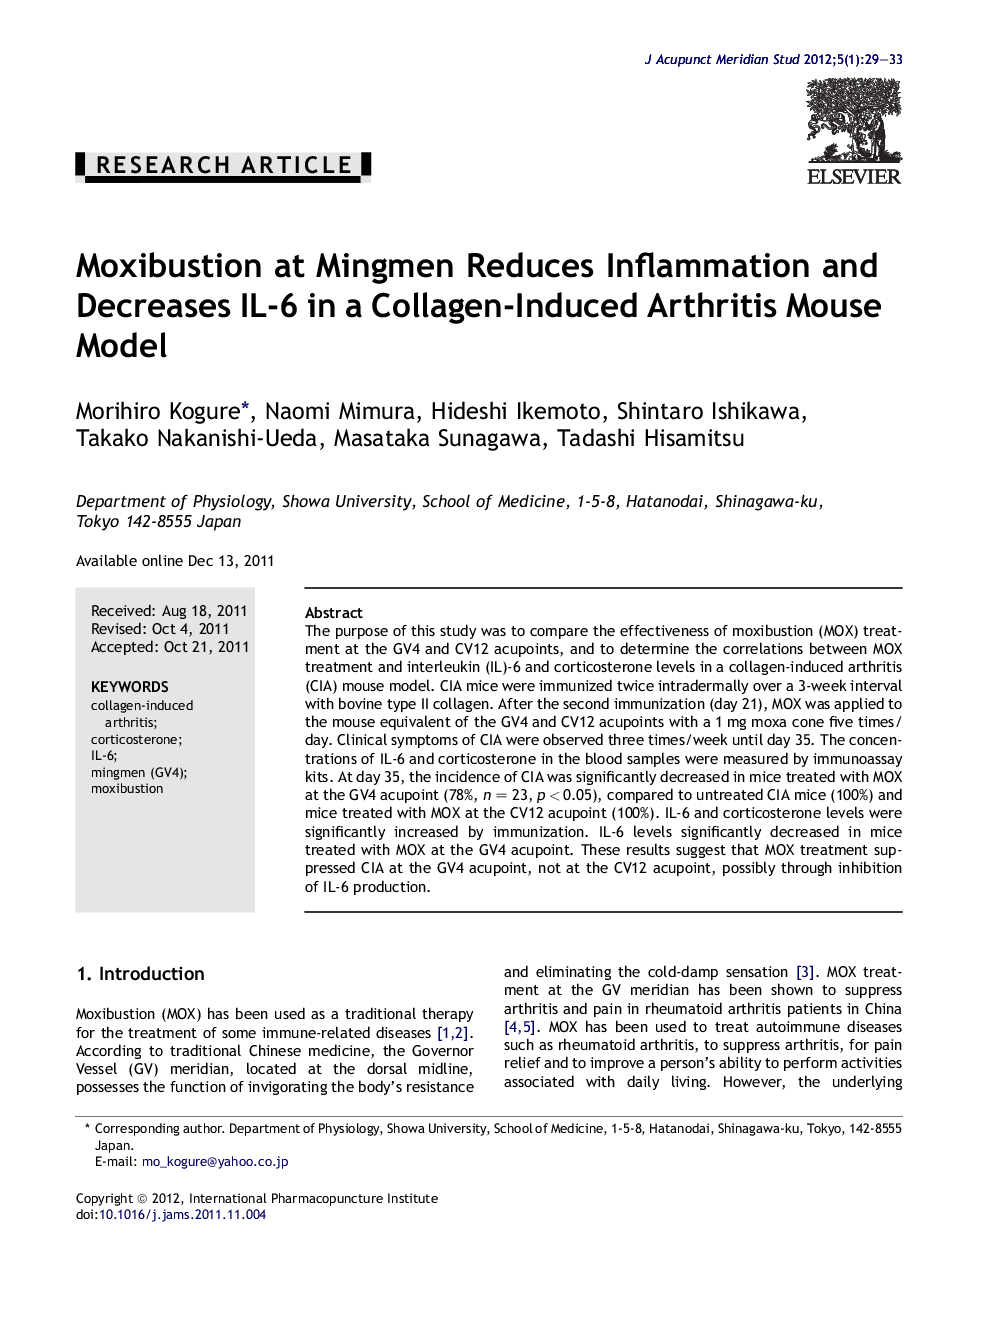 Moxibustion at Mingmen Reduces Inflammation and Decreases IL-6 in a Collagen-Induced Arthritis Mouse Model